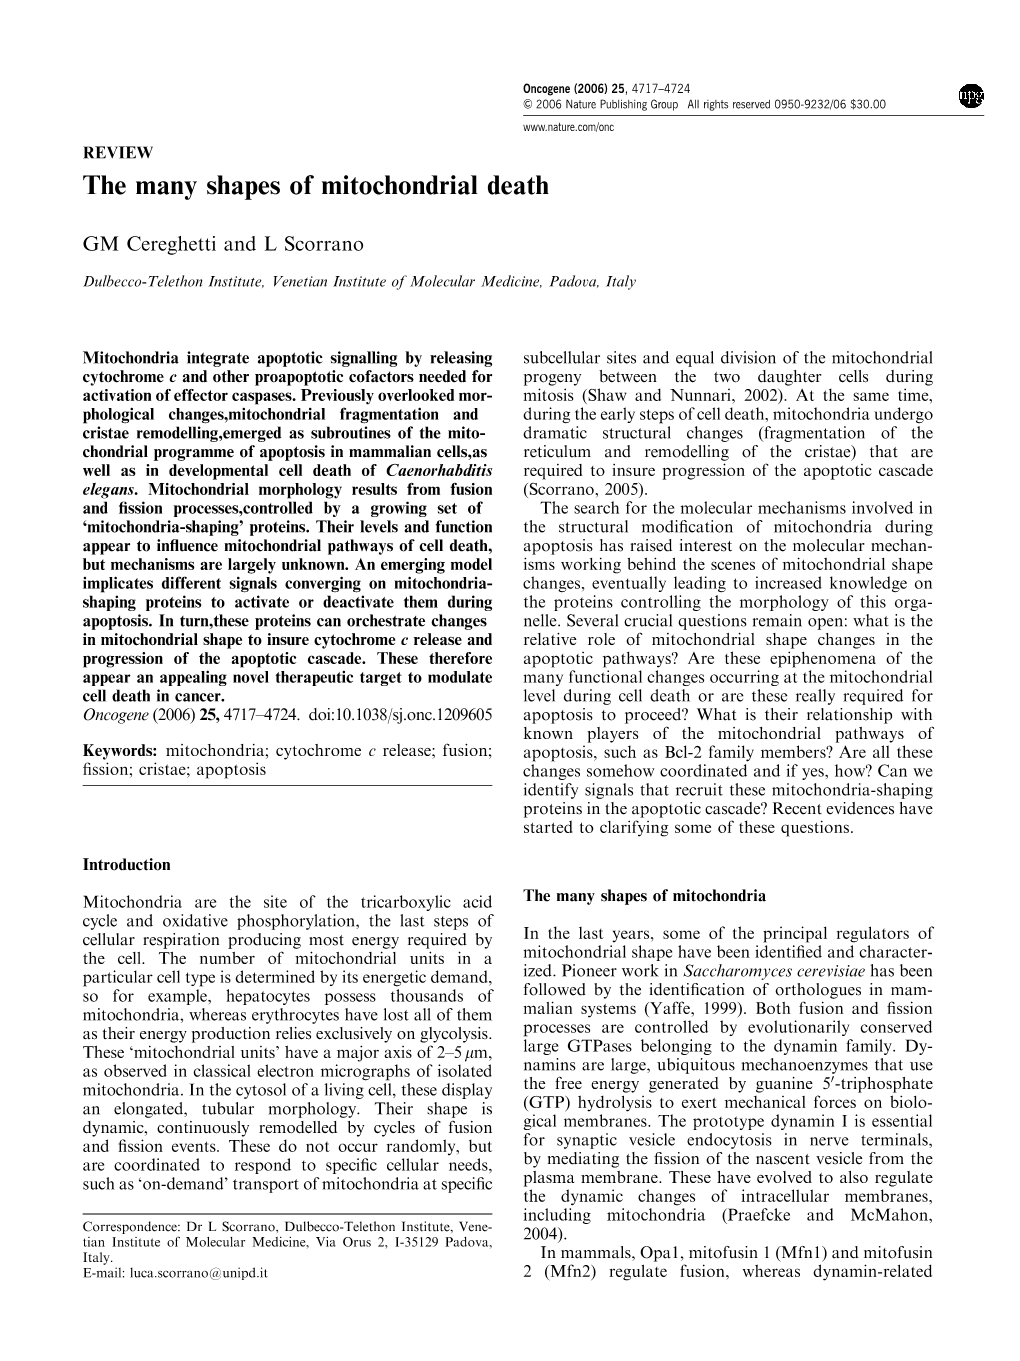 The Many Shapes of Mitochondrial Death